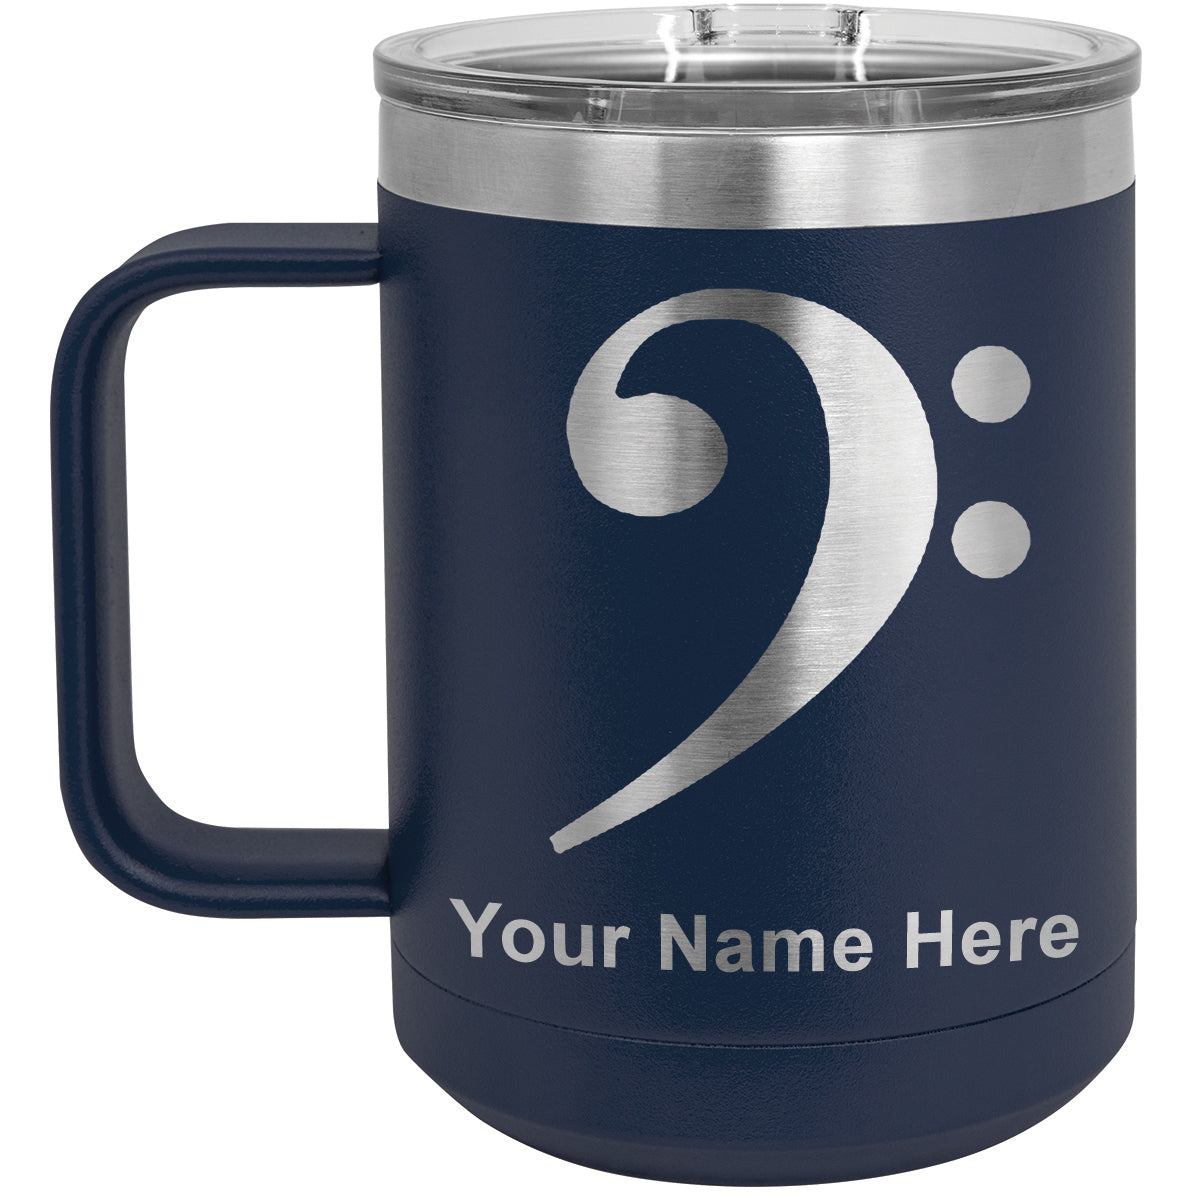 15oz Vacuum Insulated Coffee Mug, Bass Clef, Personalized Engraving Included